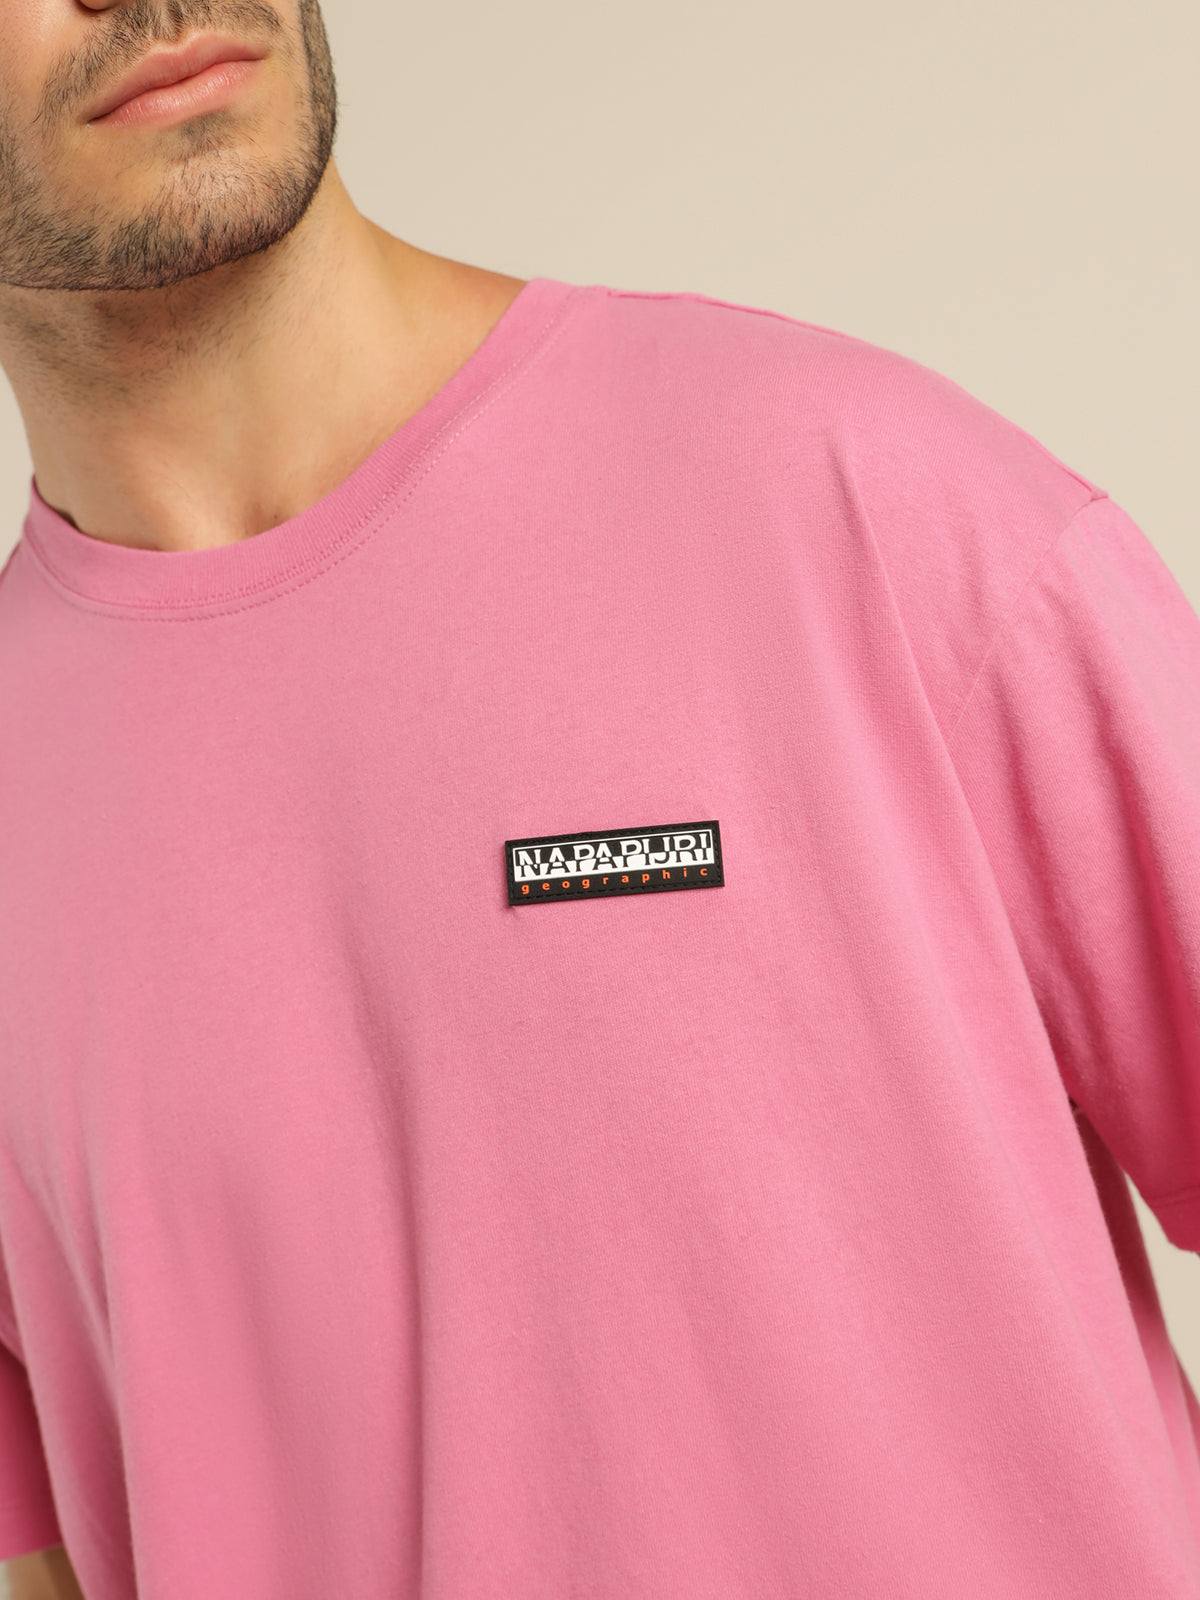 S Patch T-Shirt in Pink